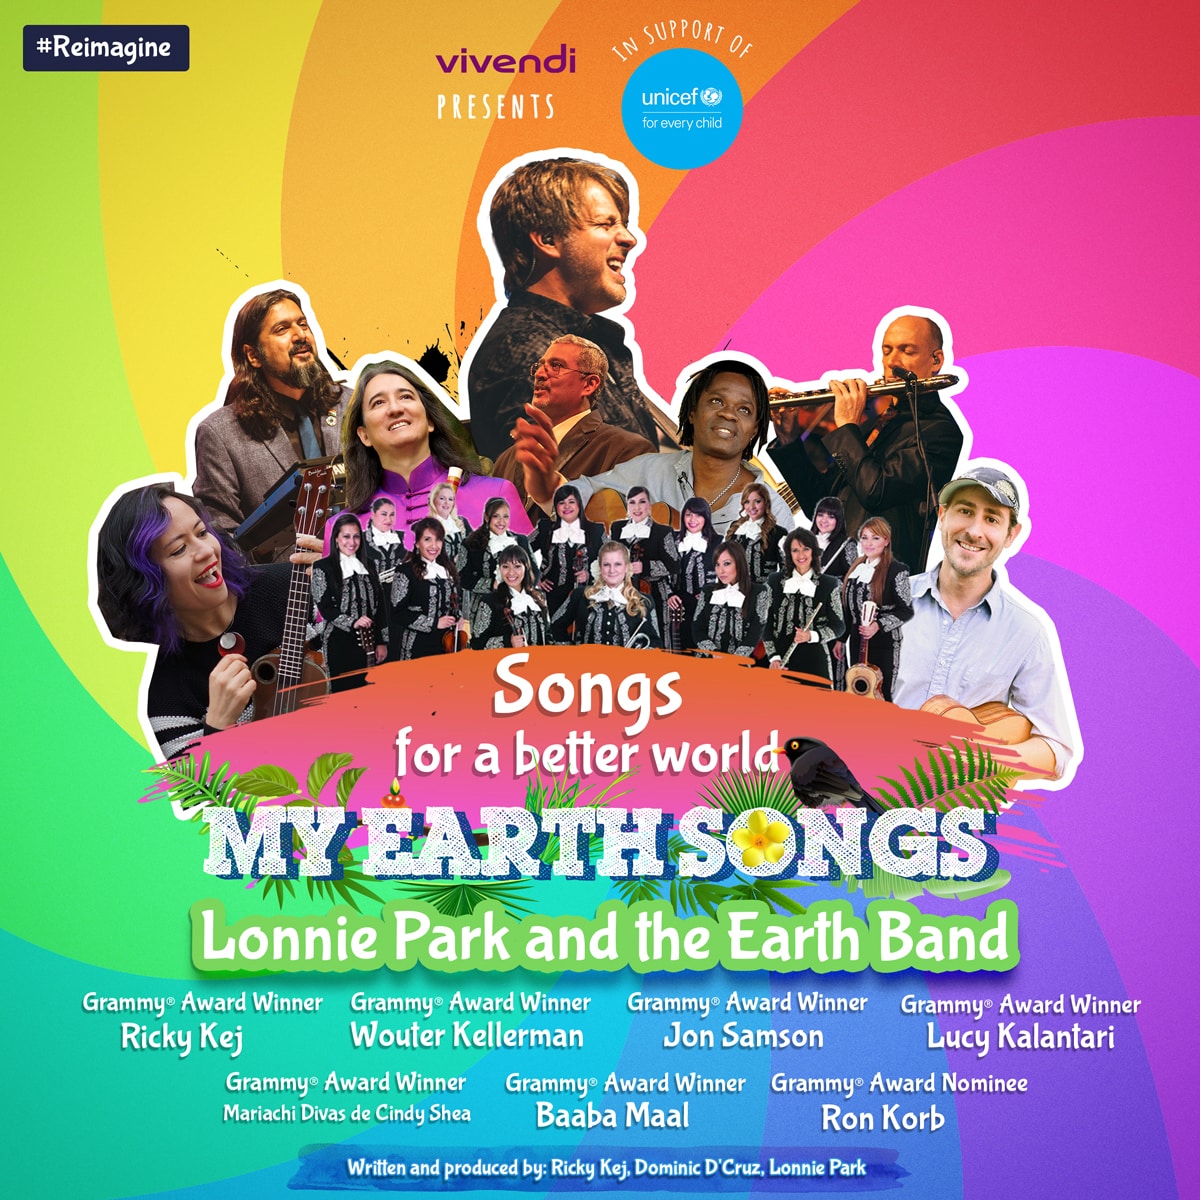 “My Earth Songs” – New Family Album Features Six Grammy Winners & Benefits UNICEF Covid-19 Relief for Children